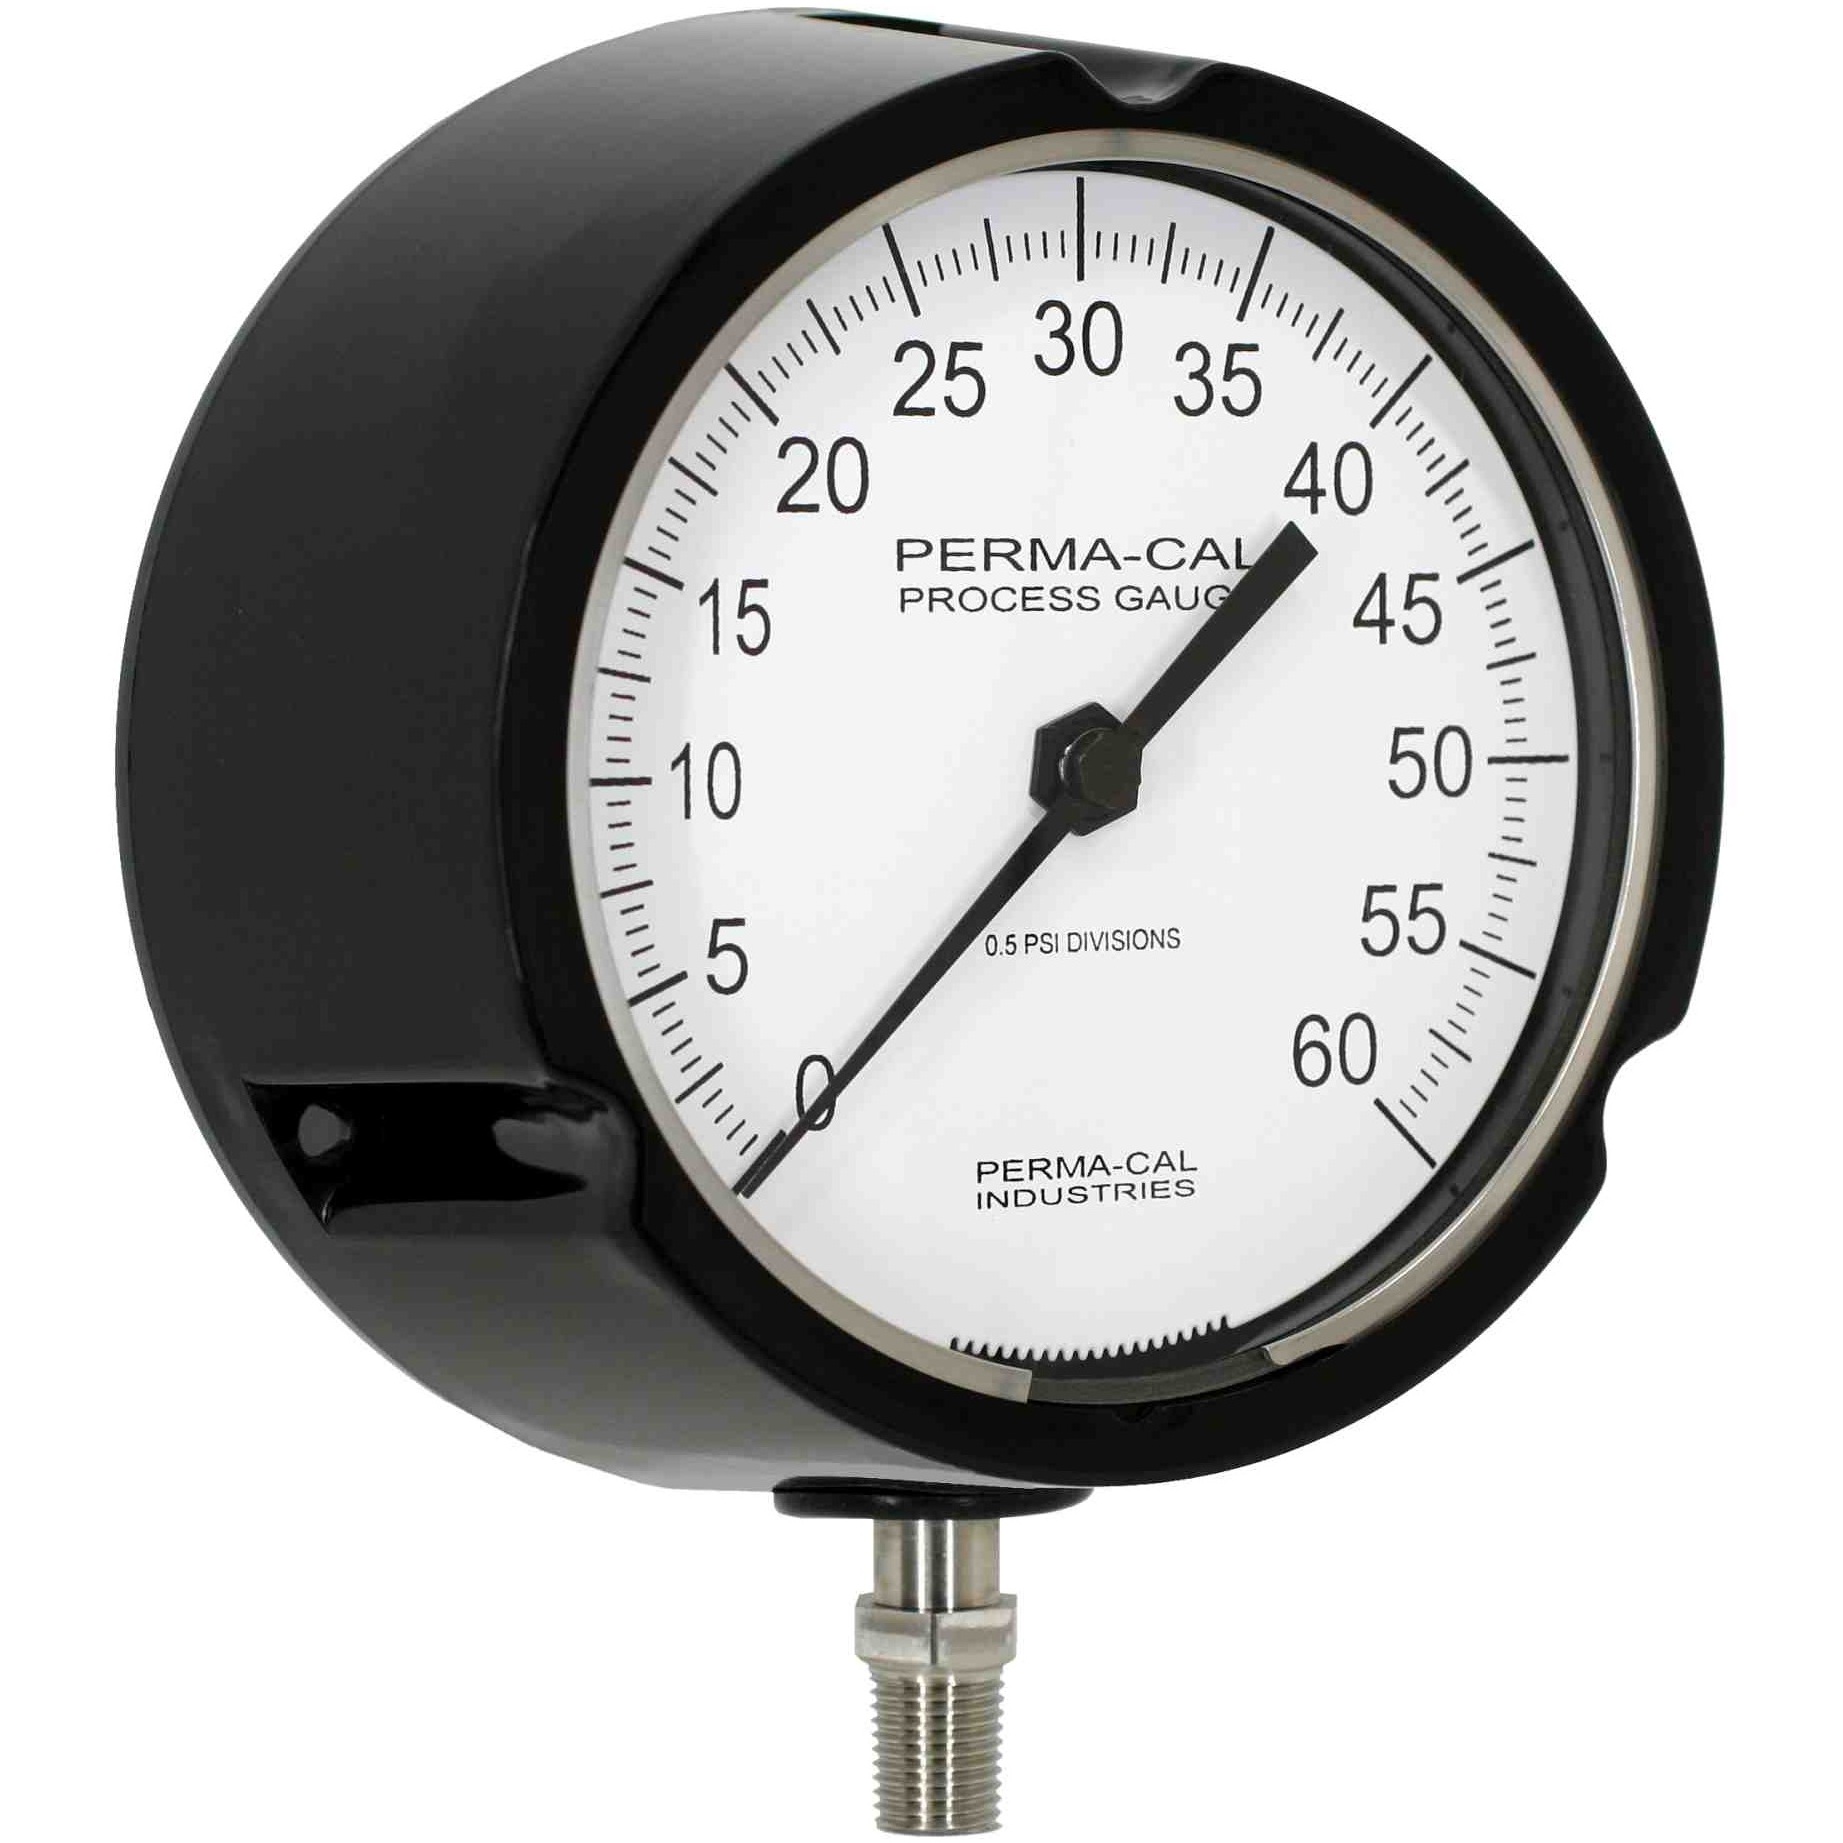 Perma-Cal 3-1/2" Panel Mount Process Gauge 0-30 PSI with 1/4" S.S Male NPT Con. 